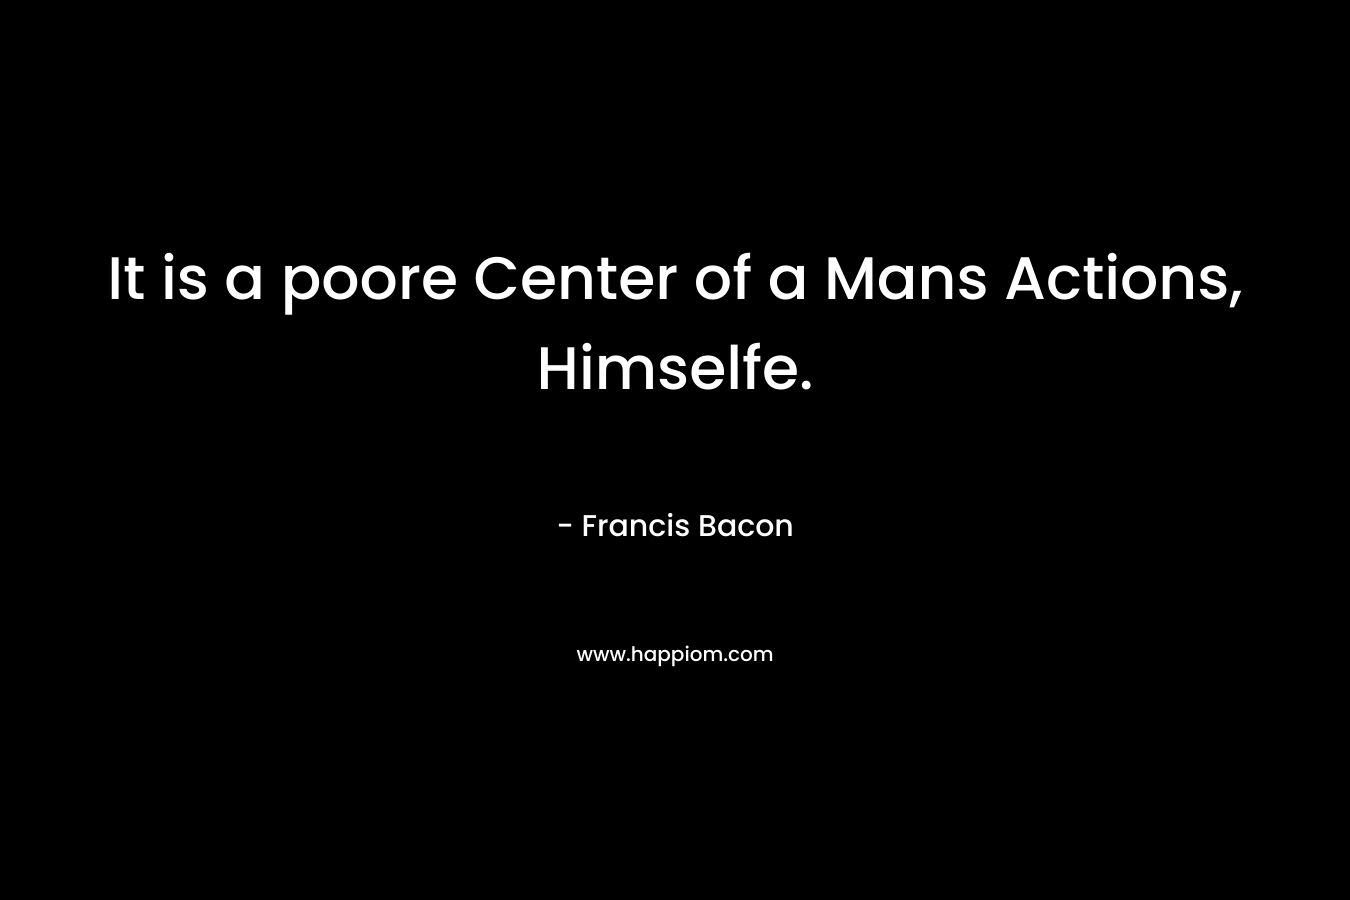 It is a poore Center of a Mans Actions, Himselfe. – Francis Bacon